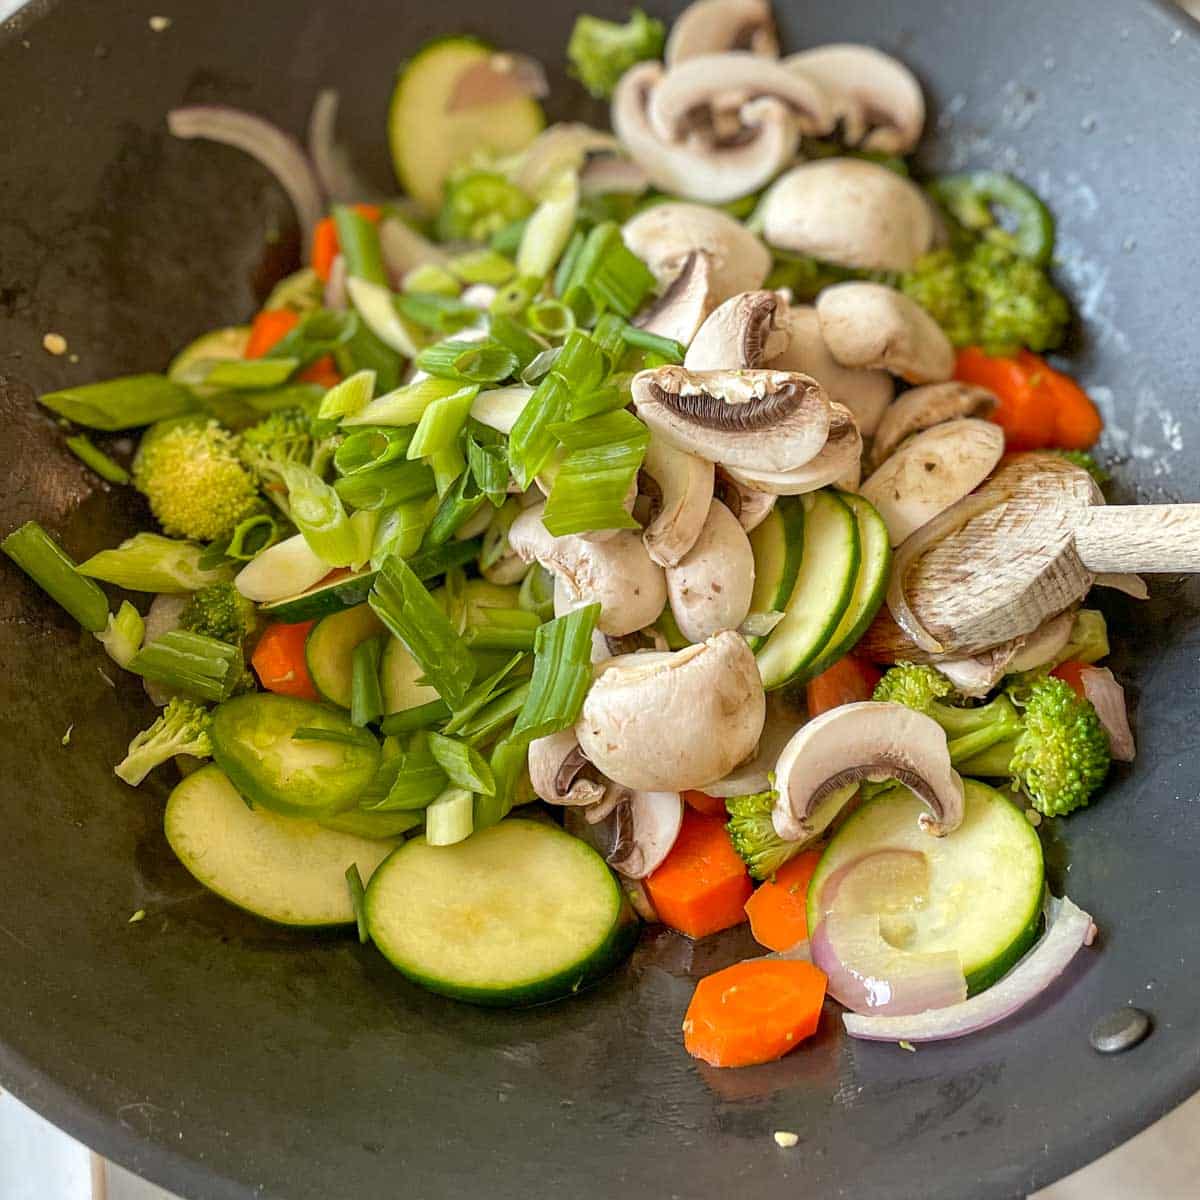 Mushrooms and scallions are added to the wok.